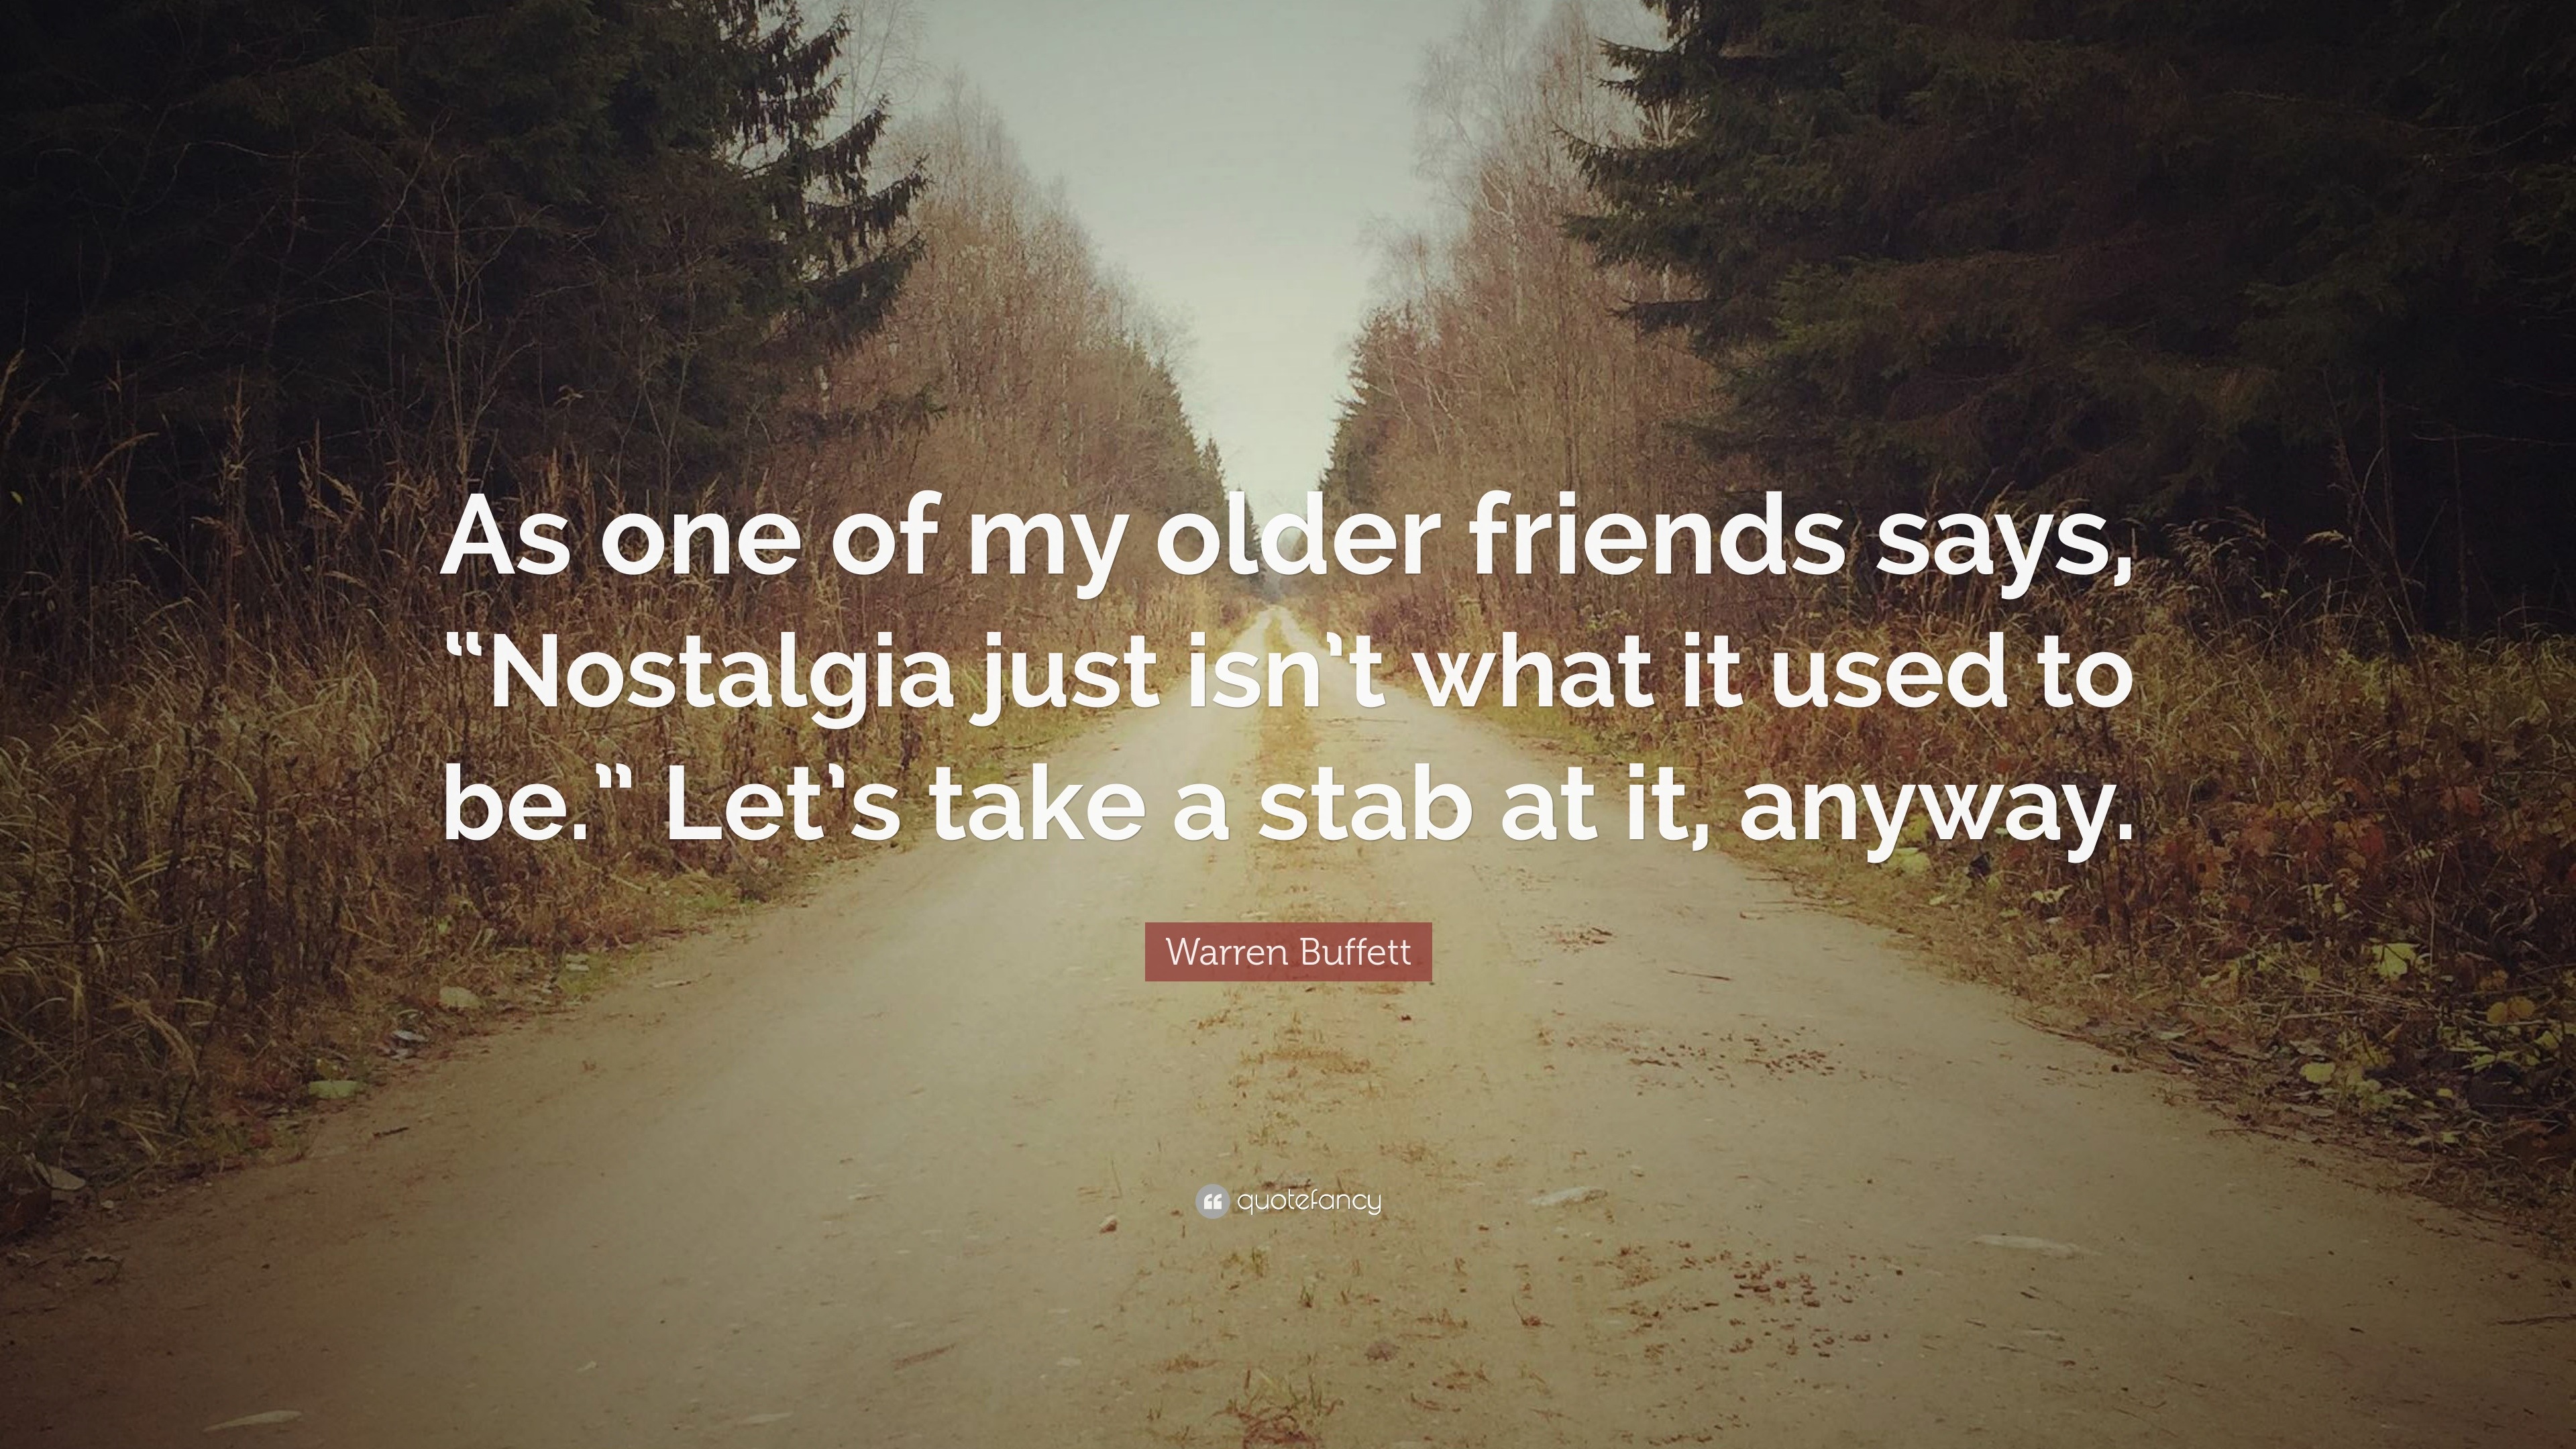 Warren Buffett Quote: “As one of my older friends says, “Nostalgia just ...